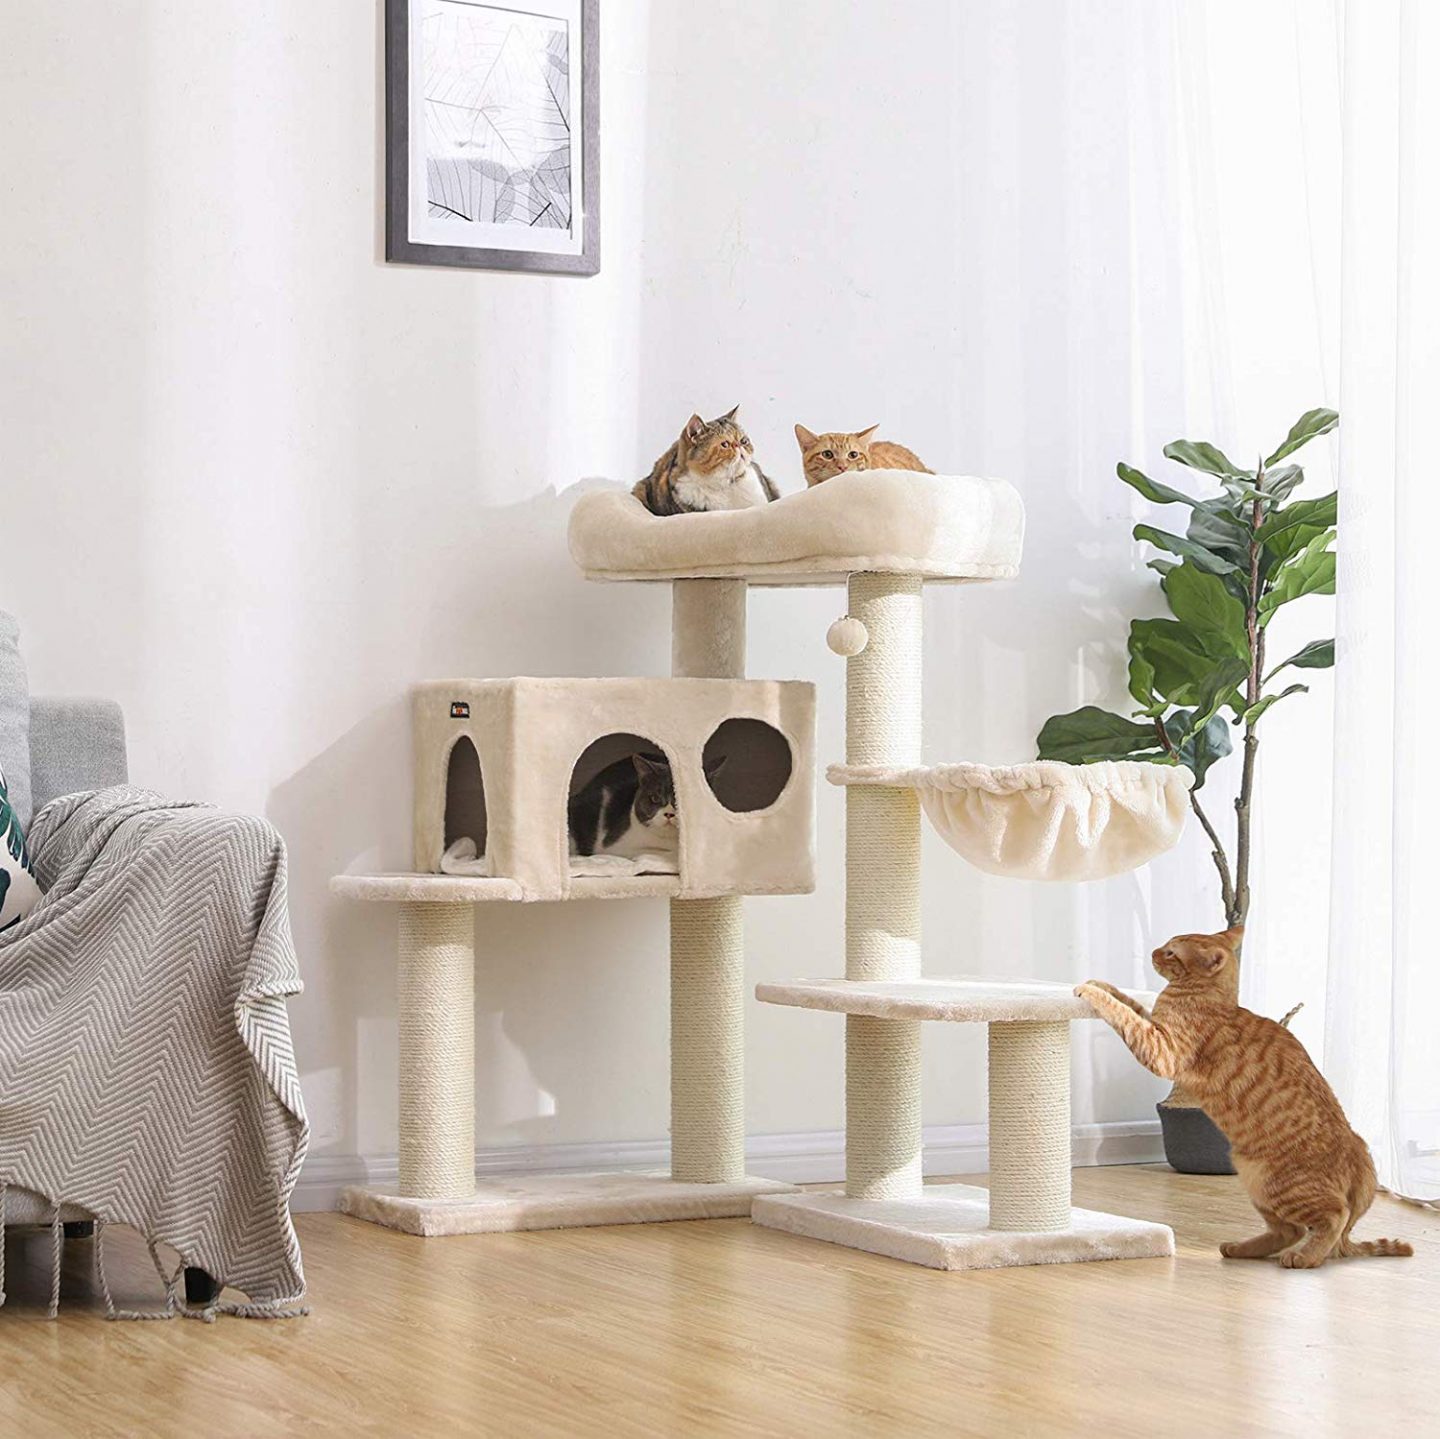 Cat trees that can be adjusted to fit your home can be just what the doctor ordered when it comes to finding a cat tree for your large cat.